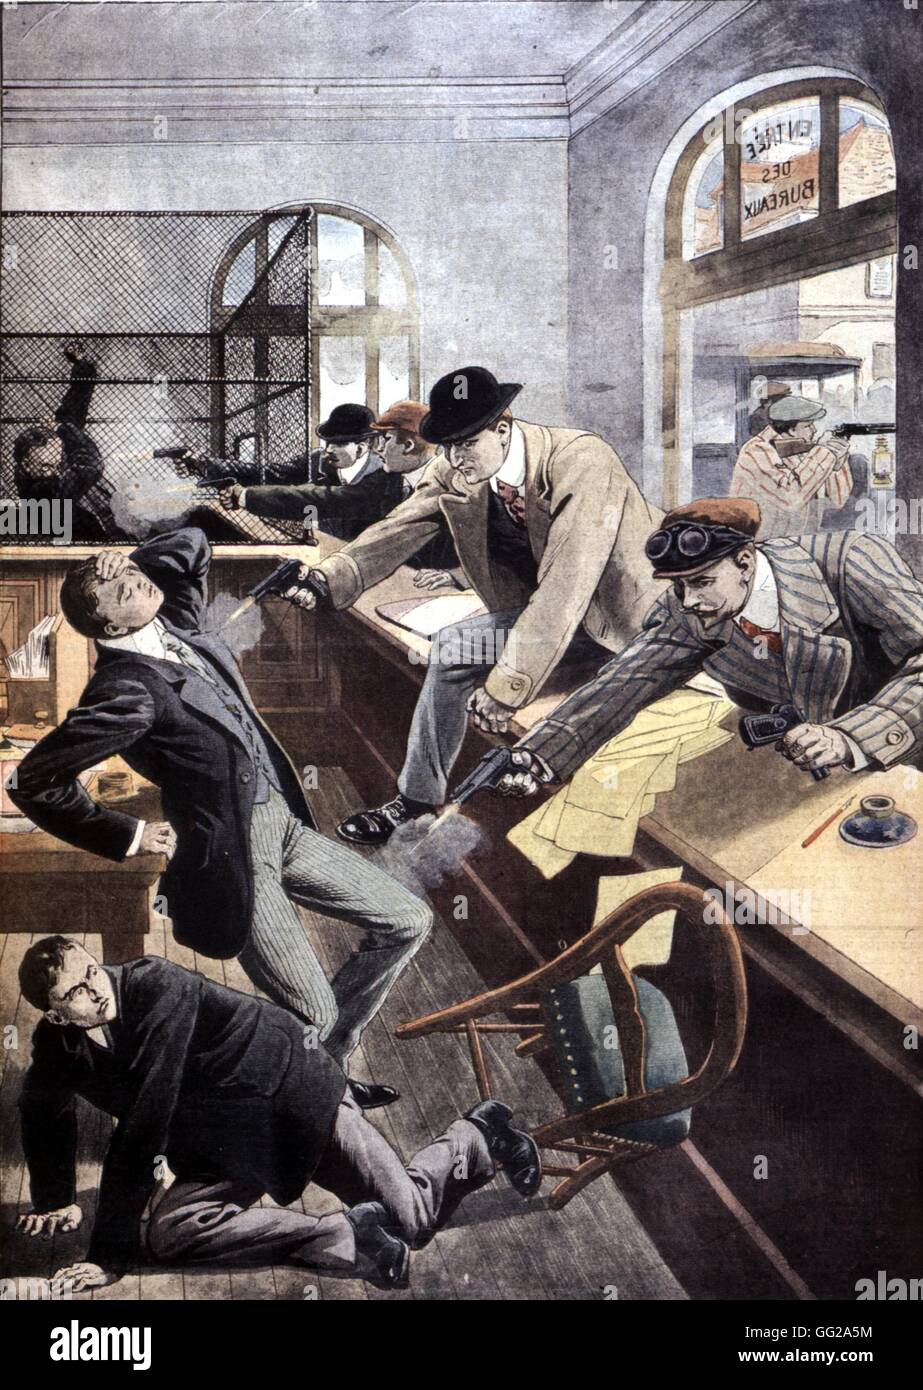 Subsidiary of the Société générale bank attacked by robbers, in Chantilly, France, published in 'Le Petit journal' newspaper. 1912 France Rousseau collection Stock Photo